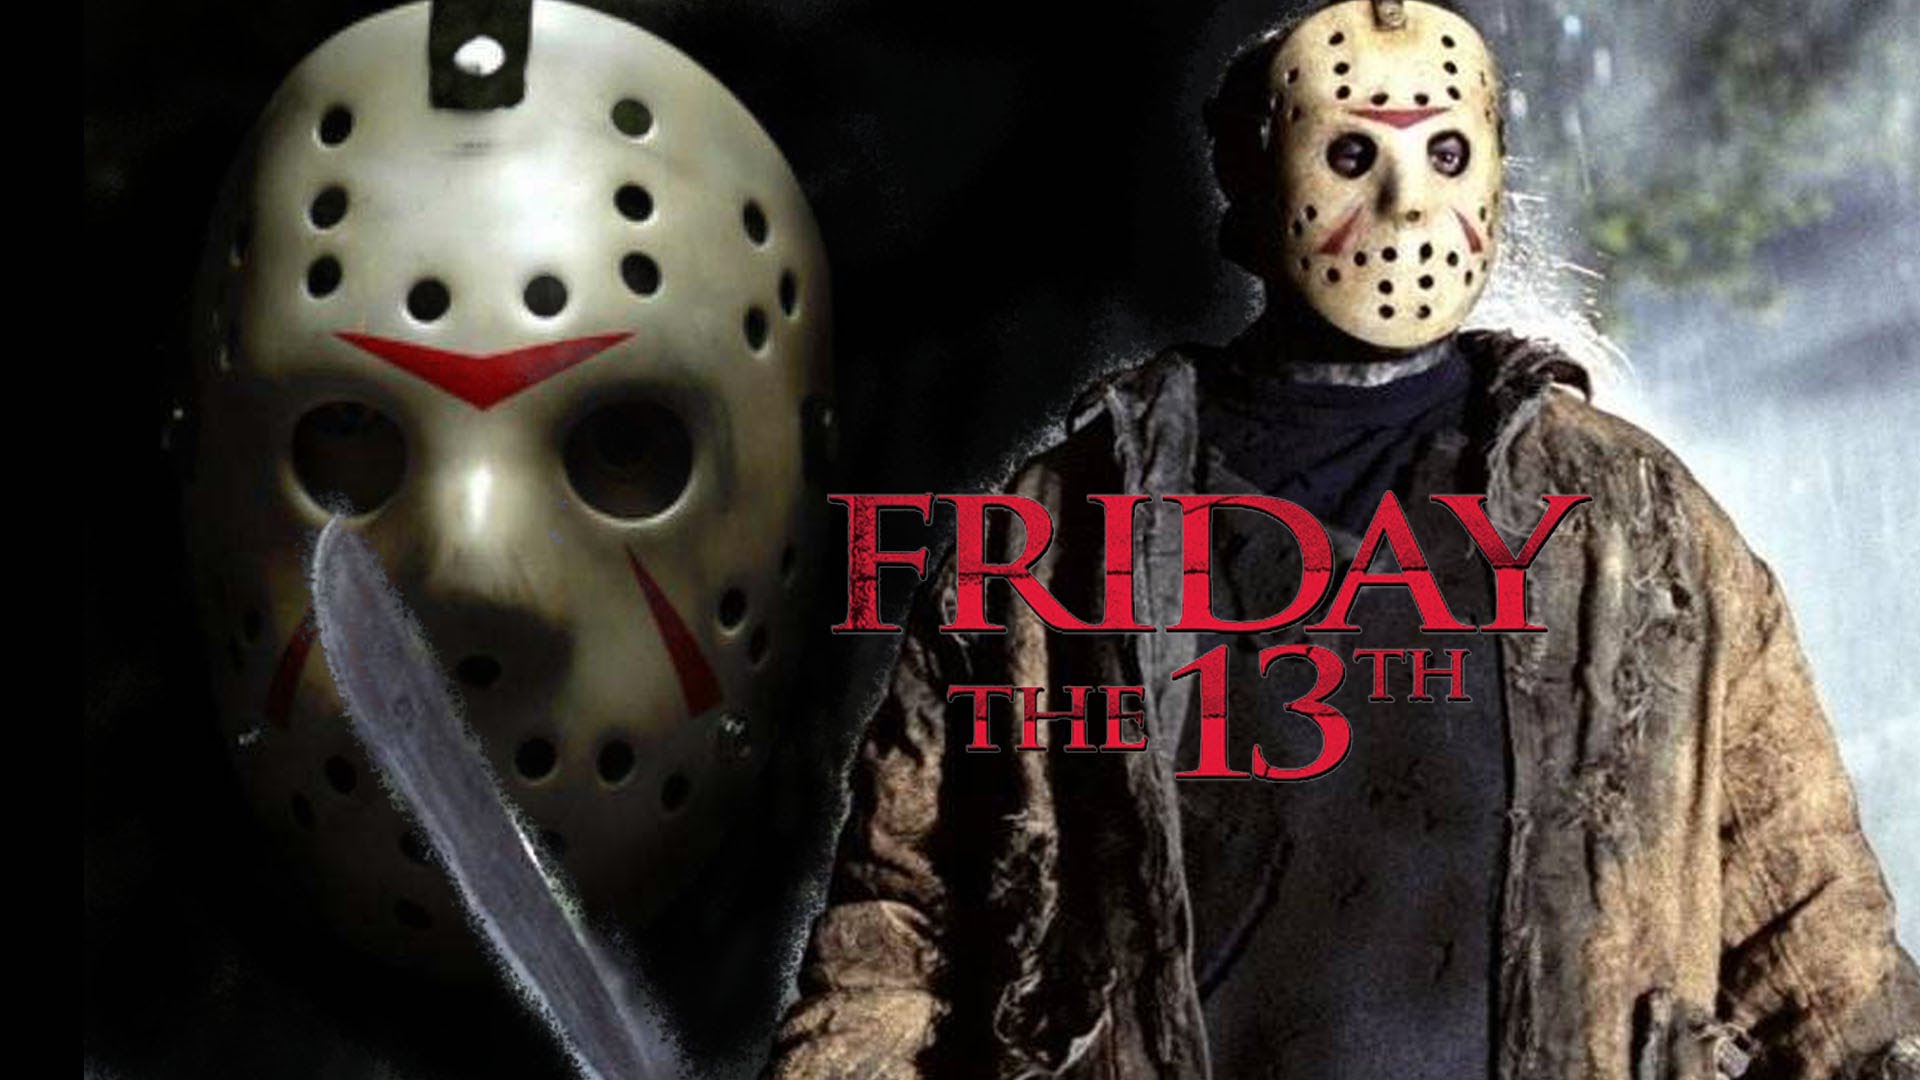 Video Game Friday The 13th HD Wallpapers. 